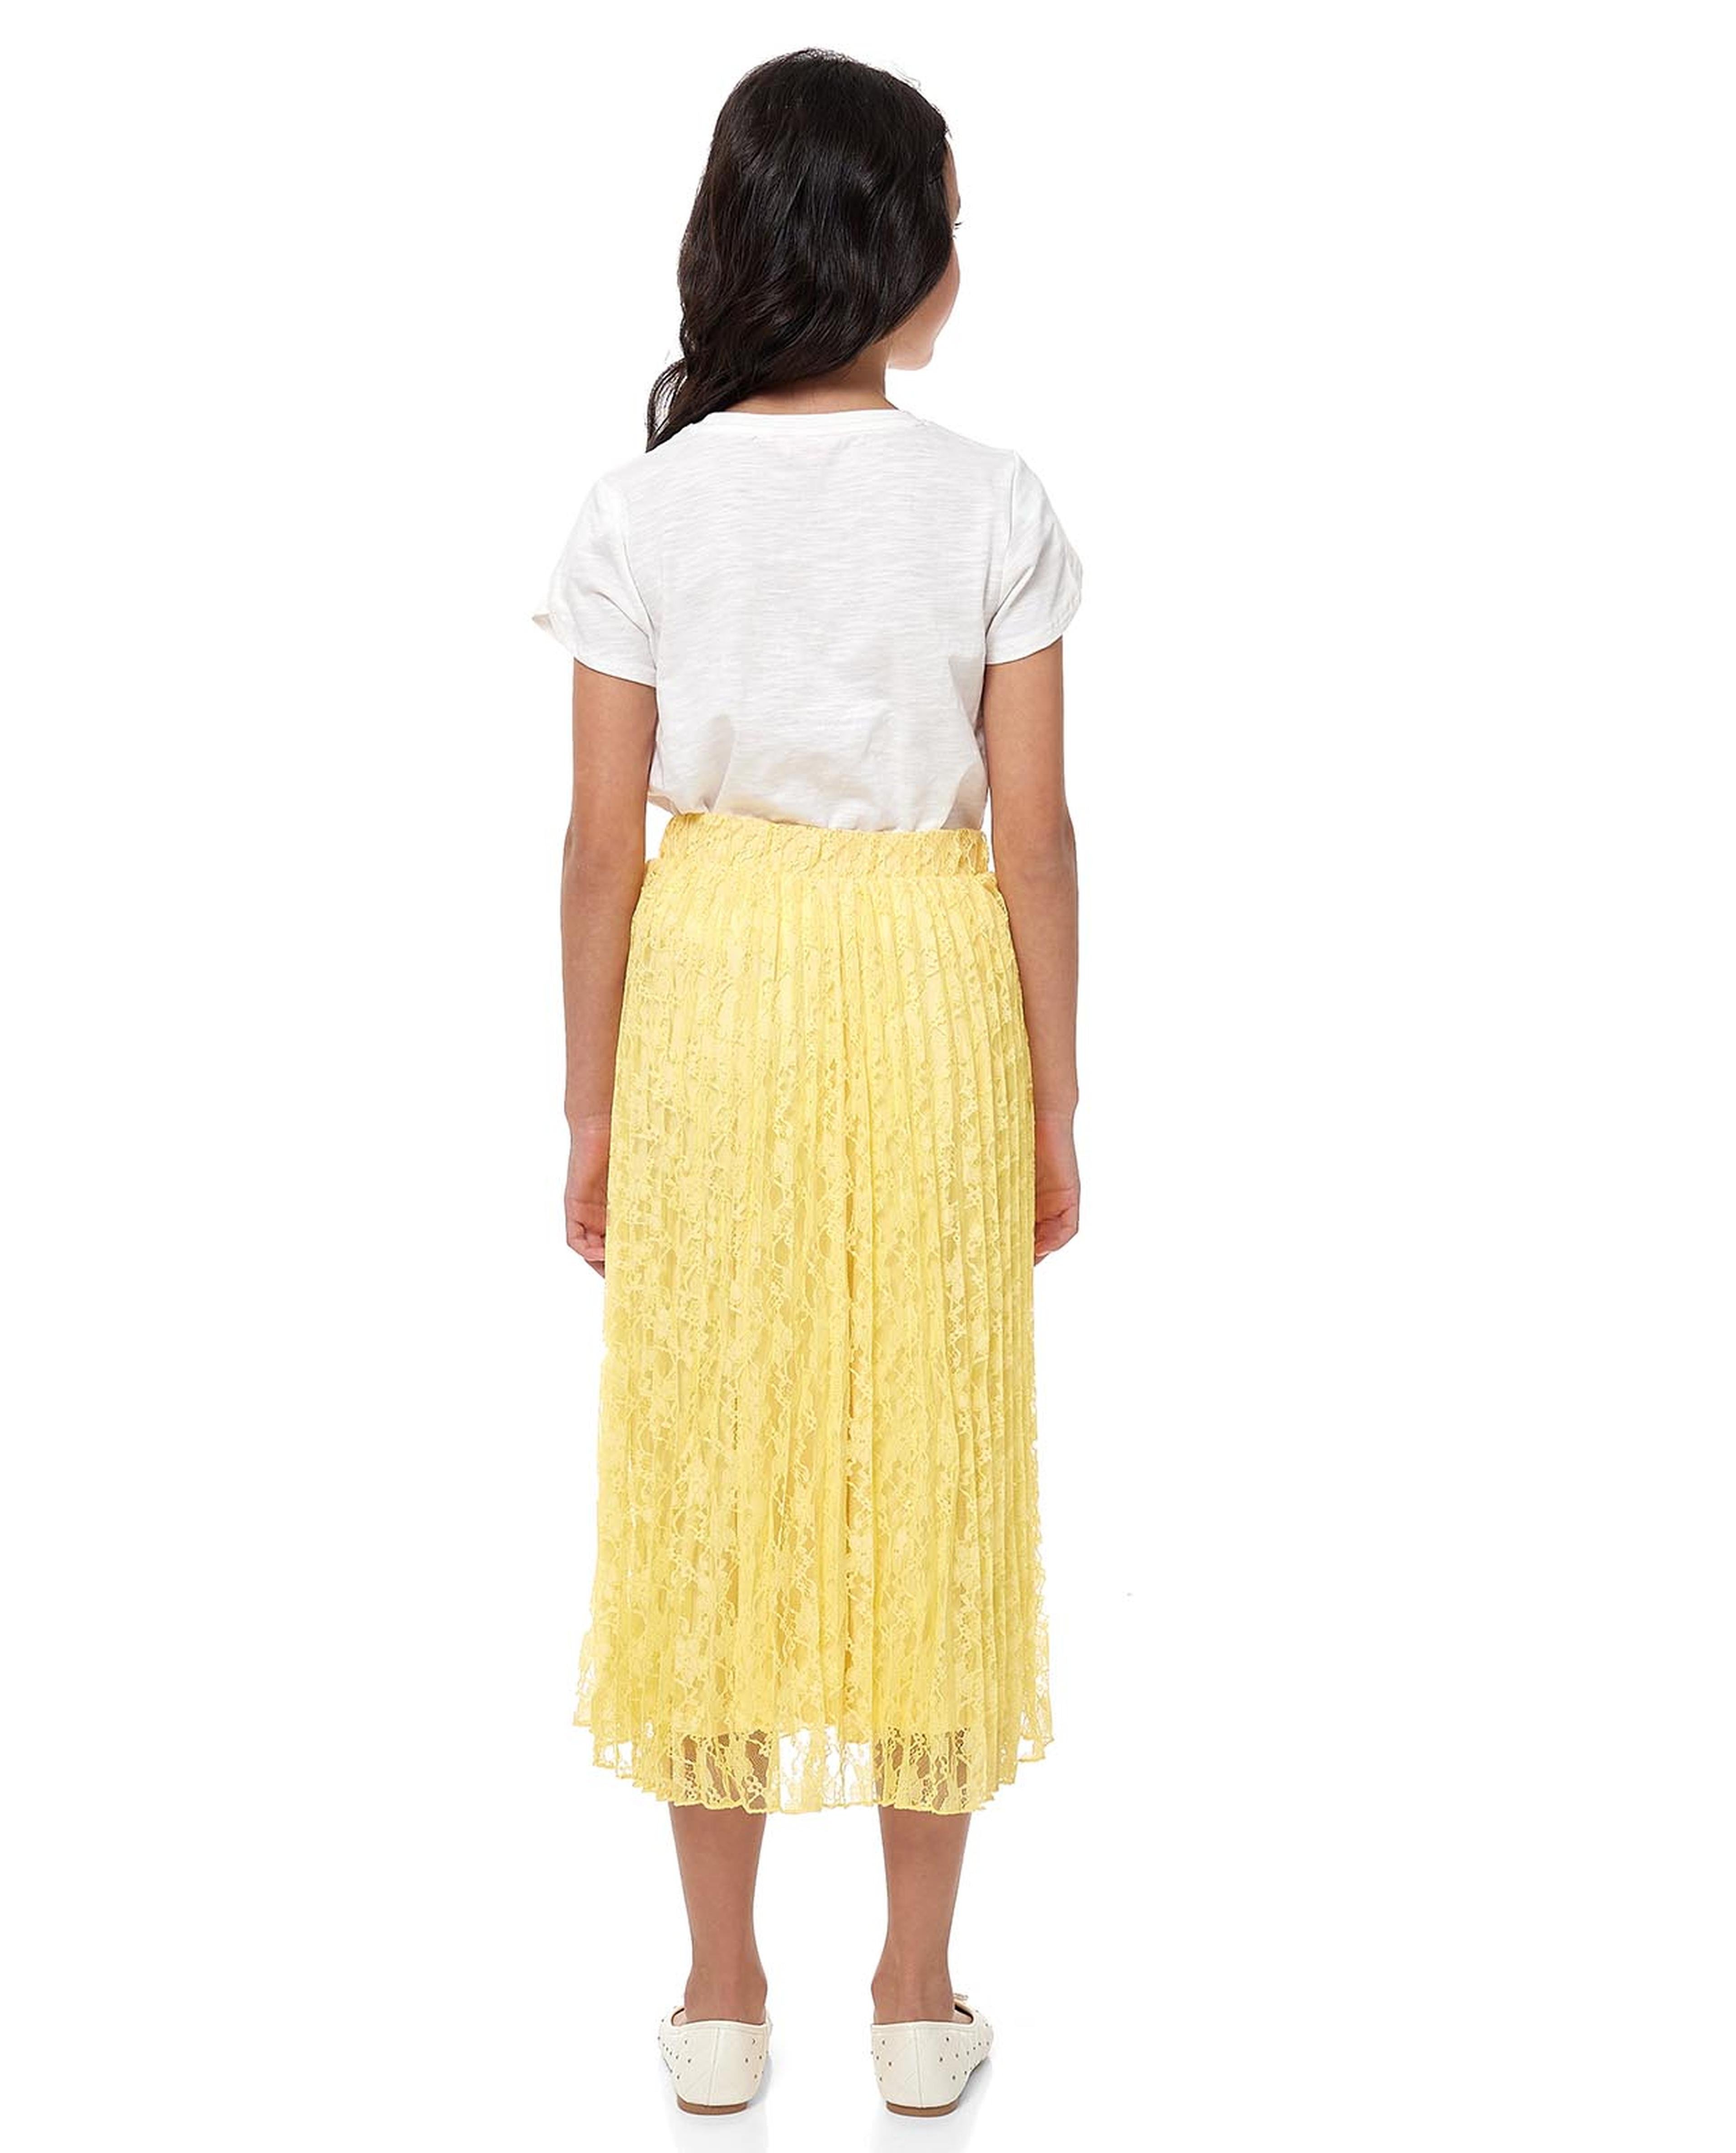 Printed T-Shirt and Laced Pleated Skirt